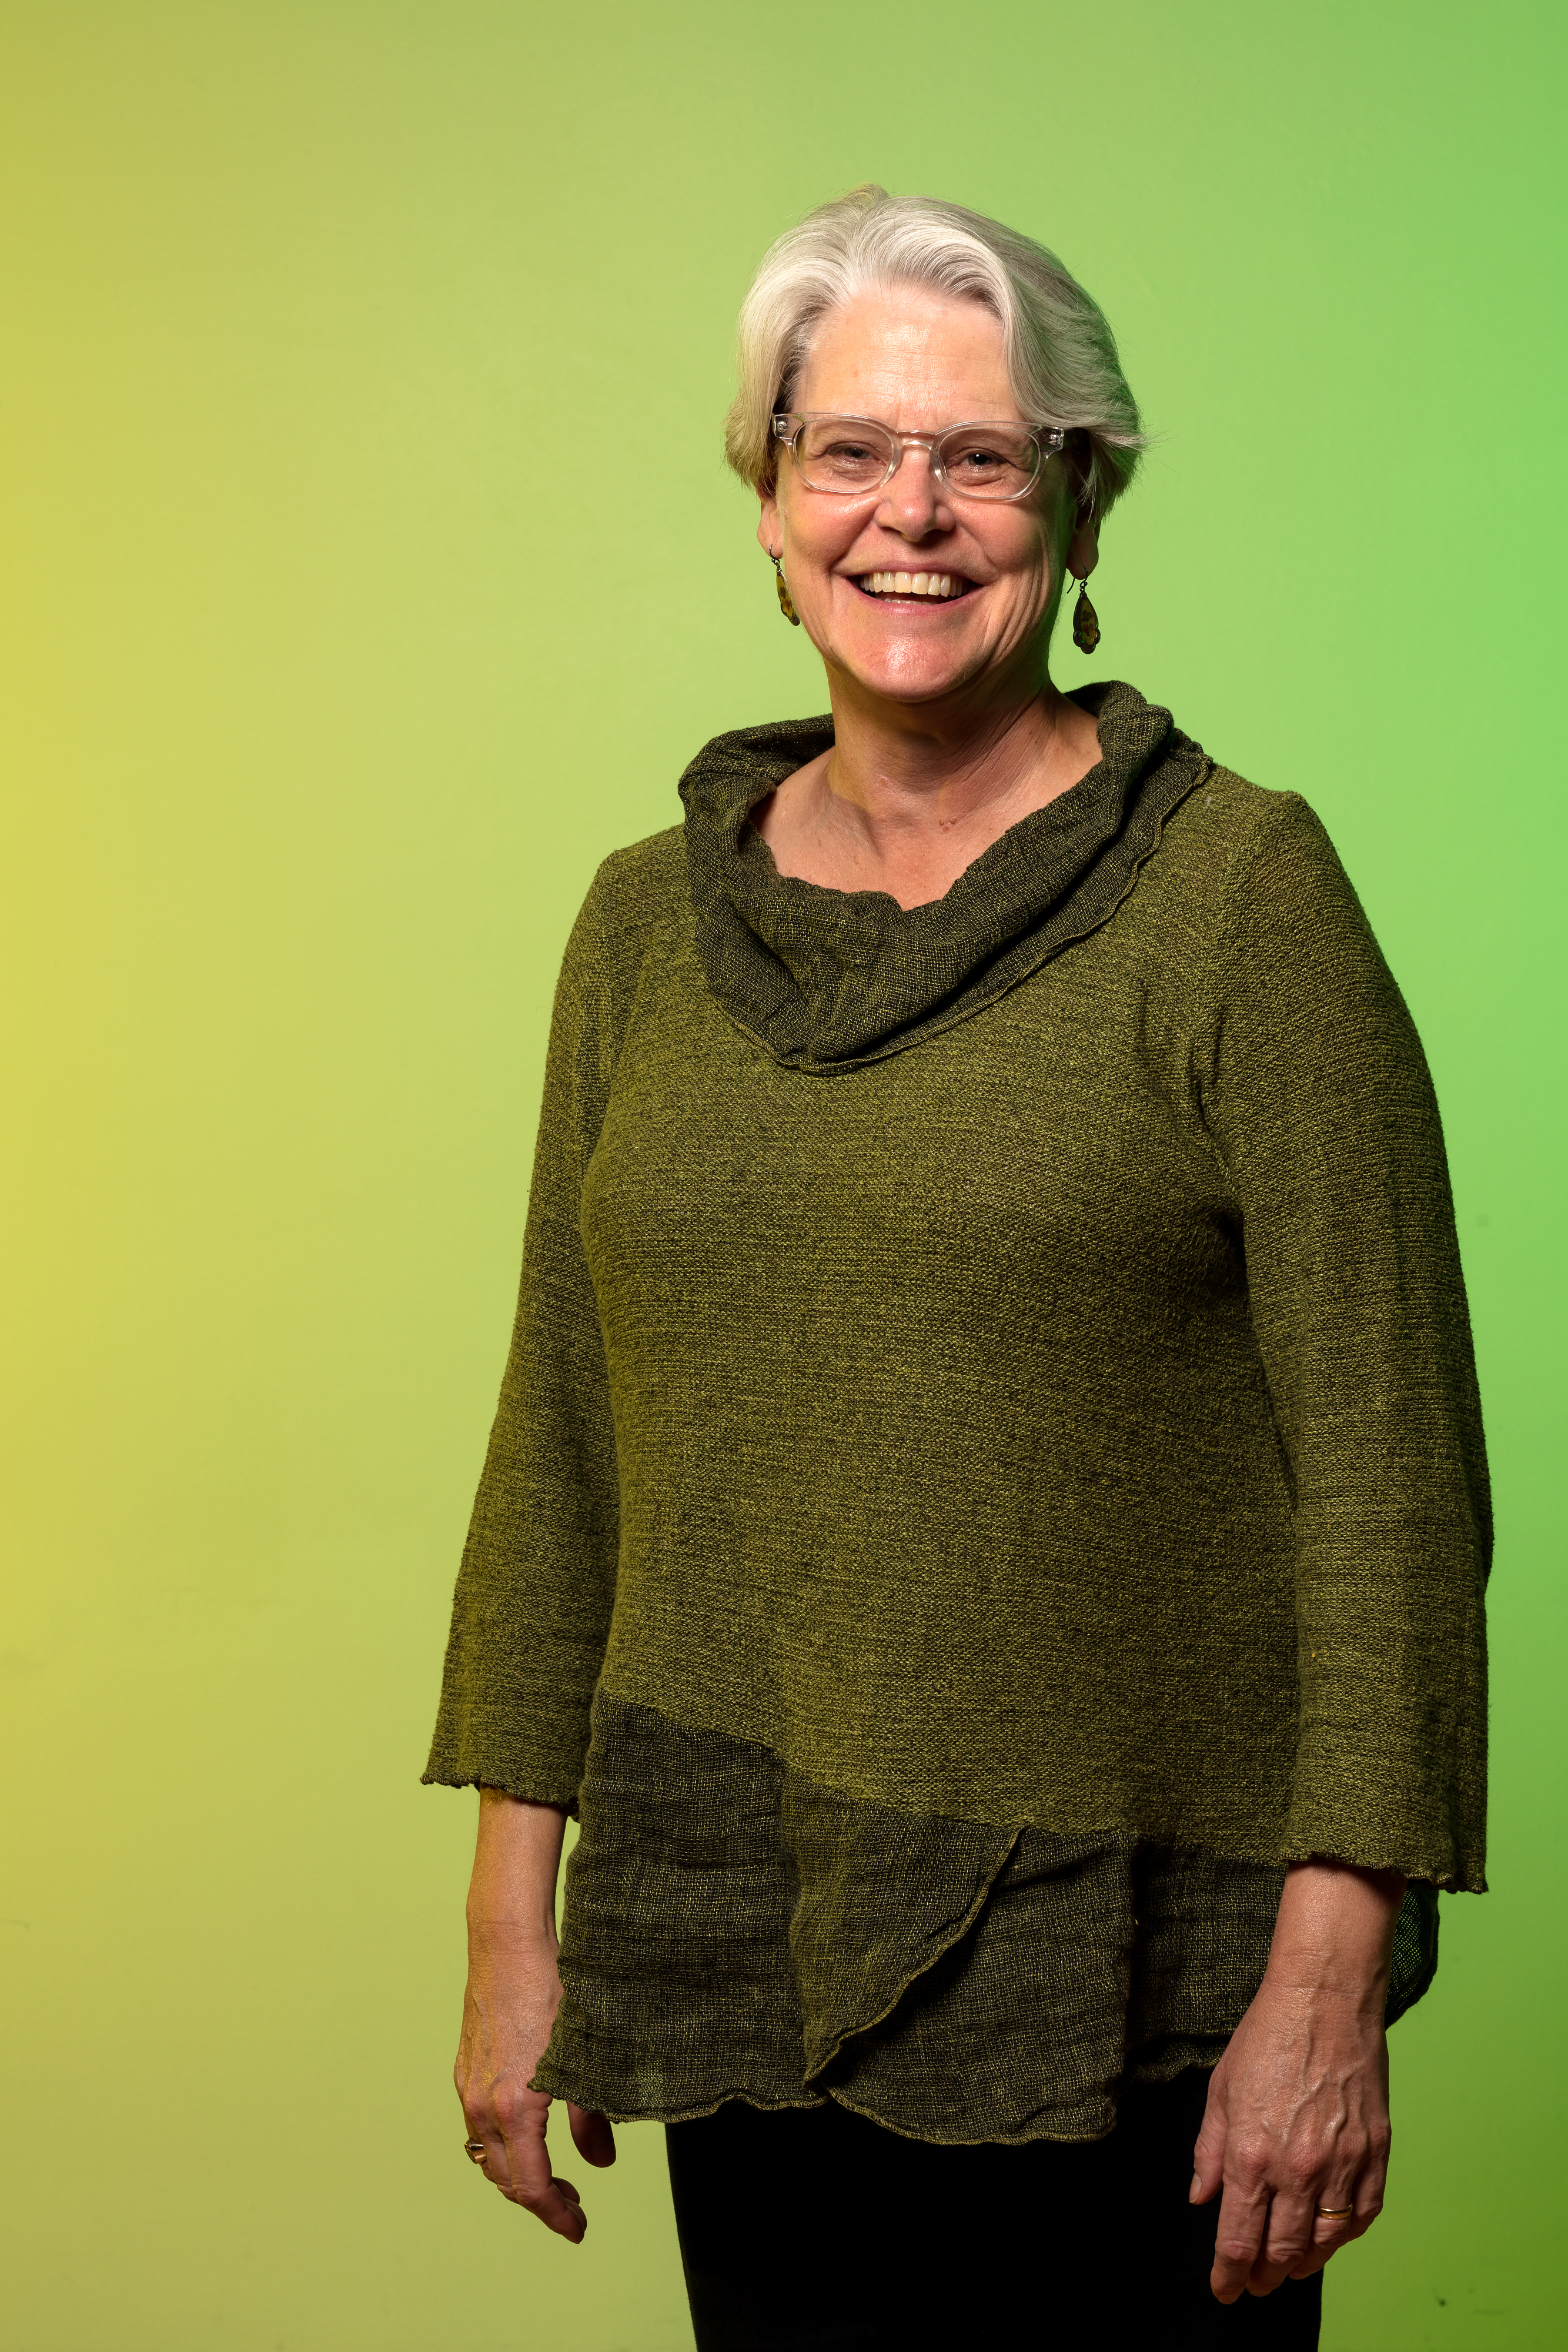 smiling woman against a bright green backdrop